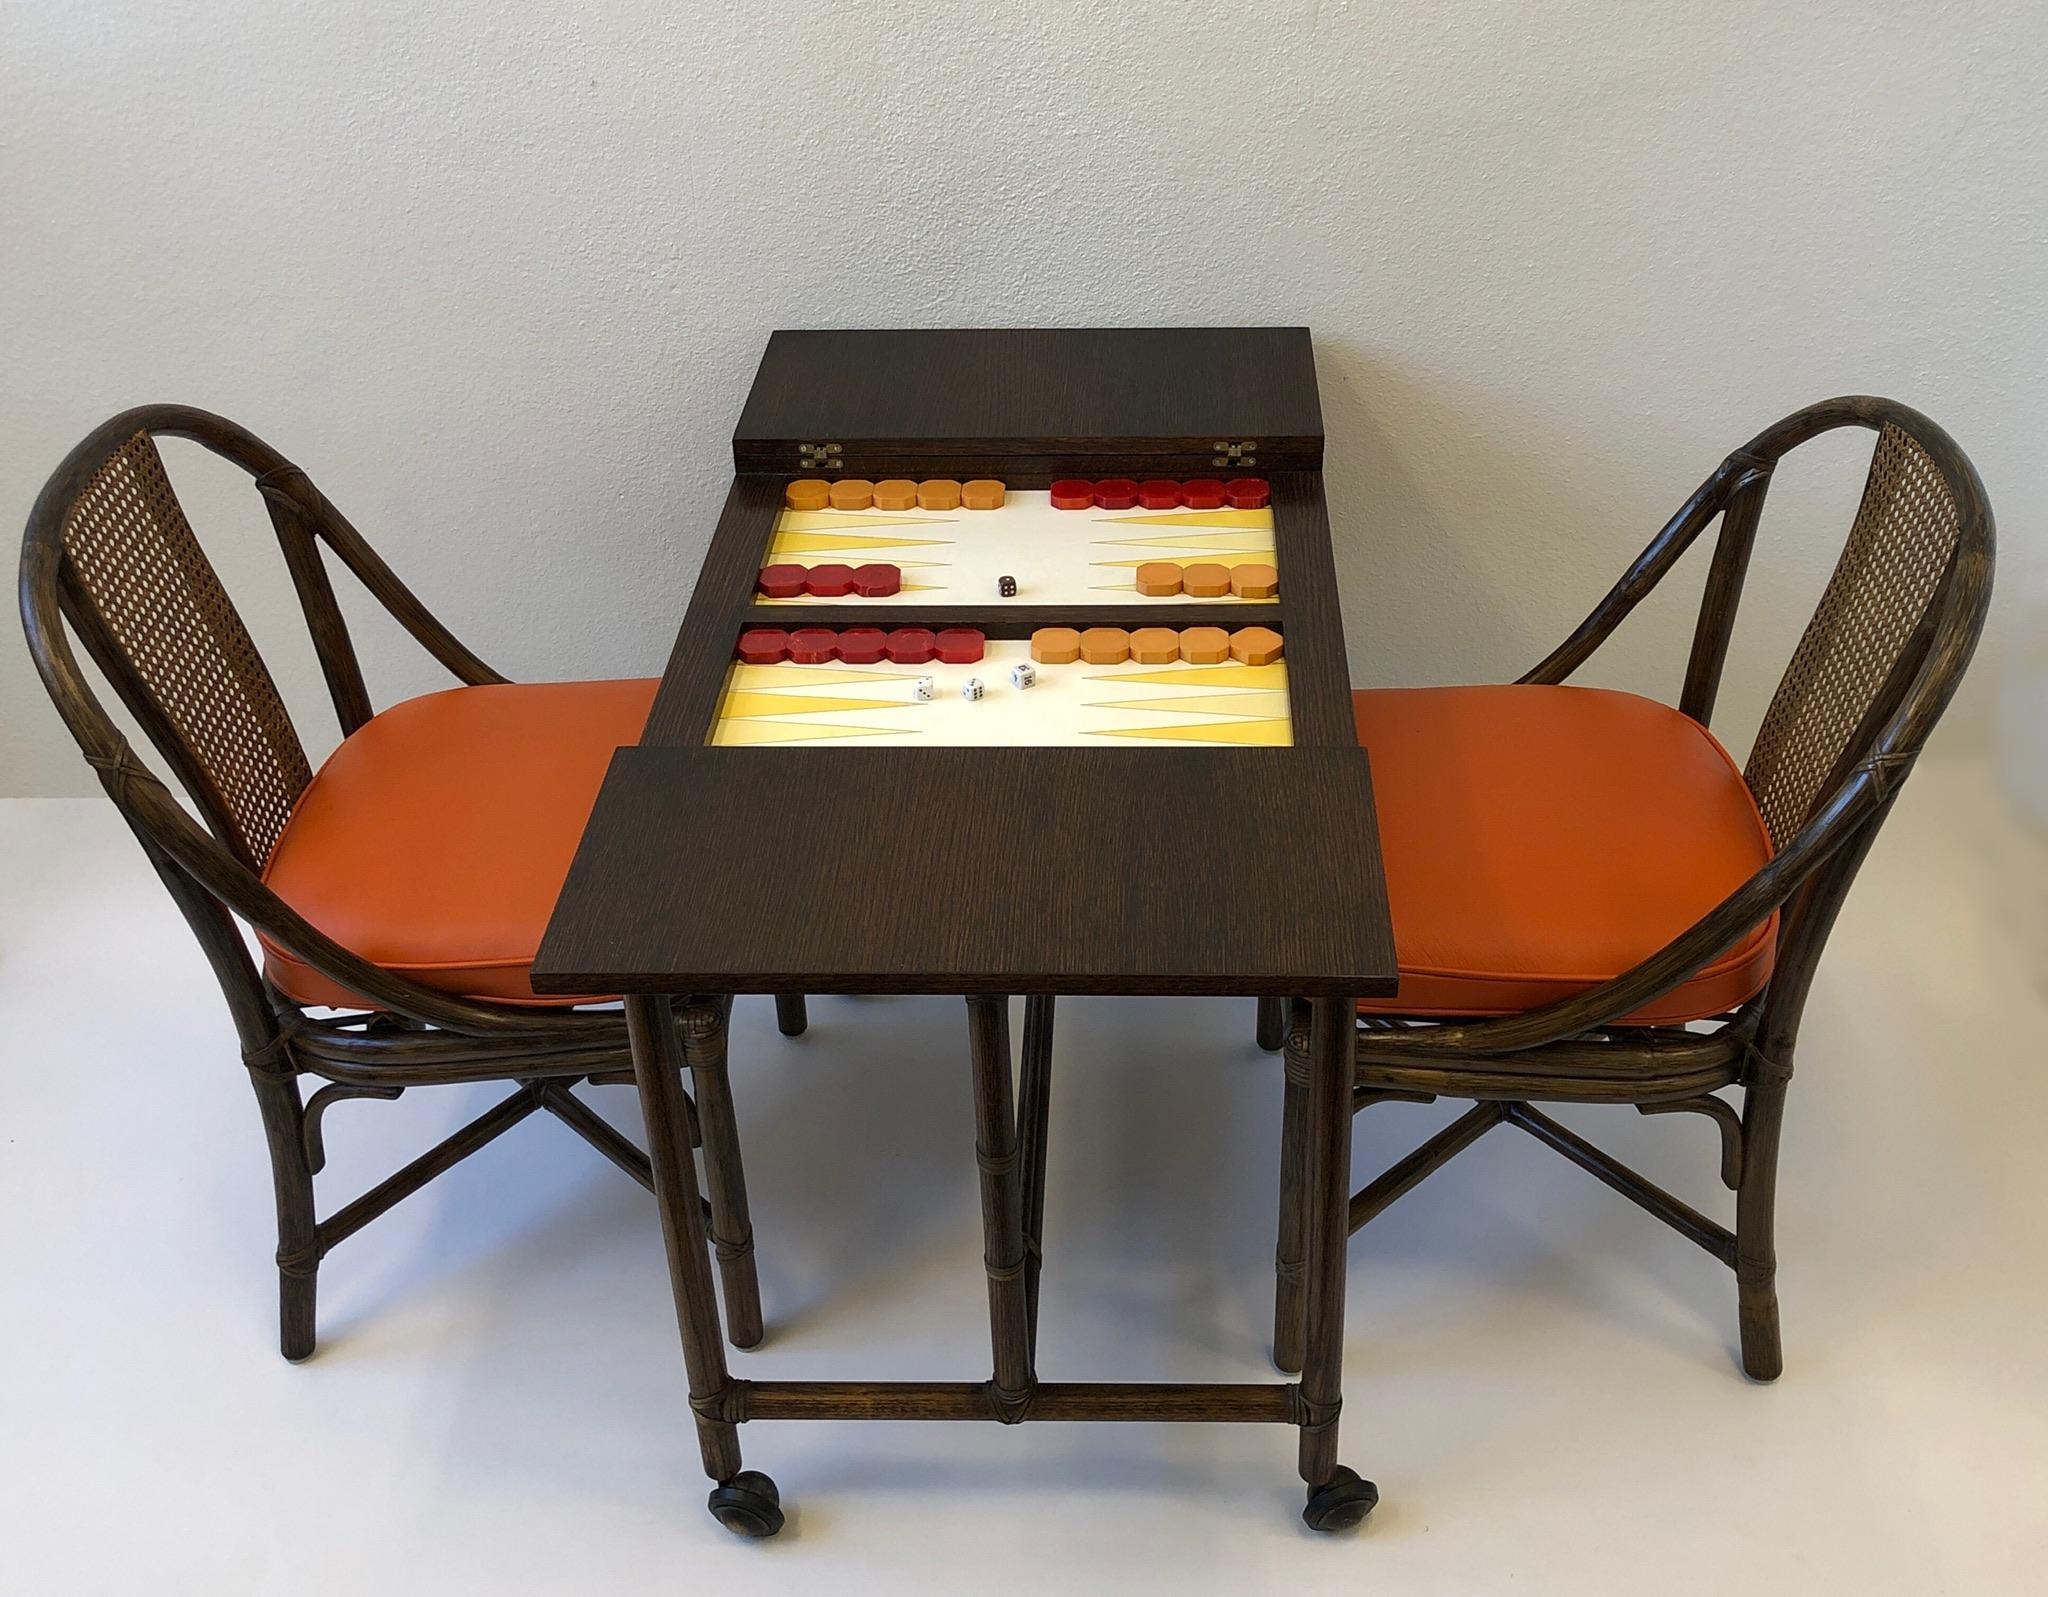 Hollywood Regency Bamboo and Oak Backgammon Game Table and Chairs by McGuire